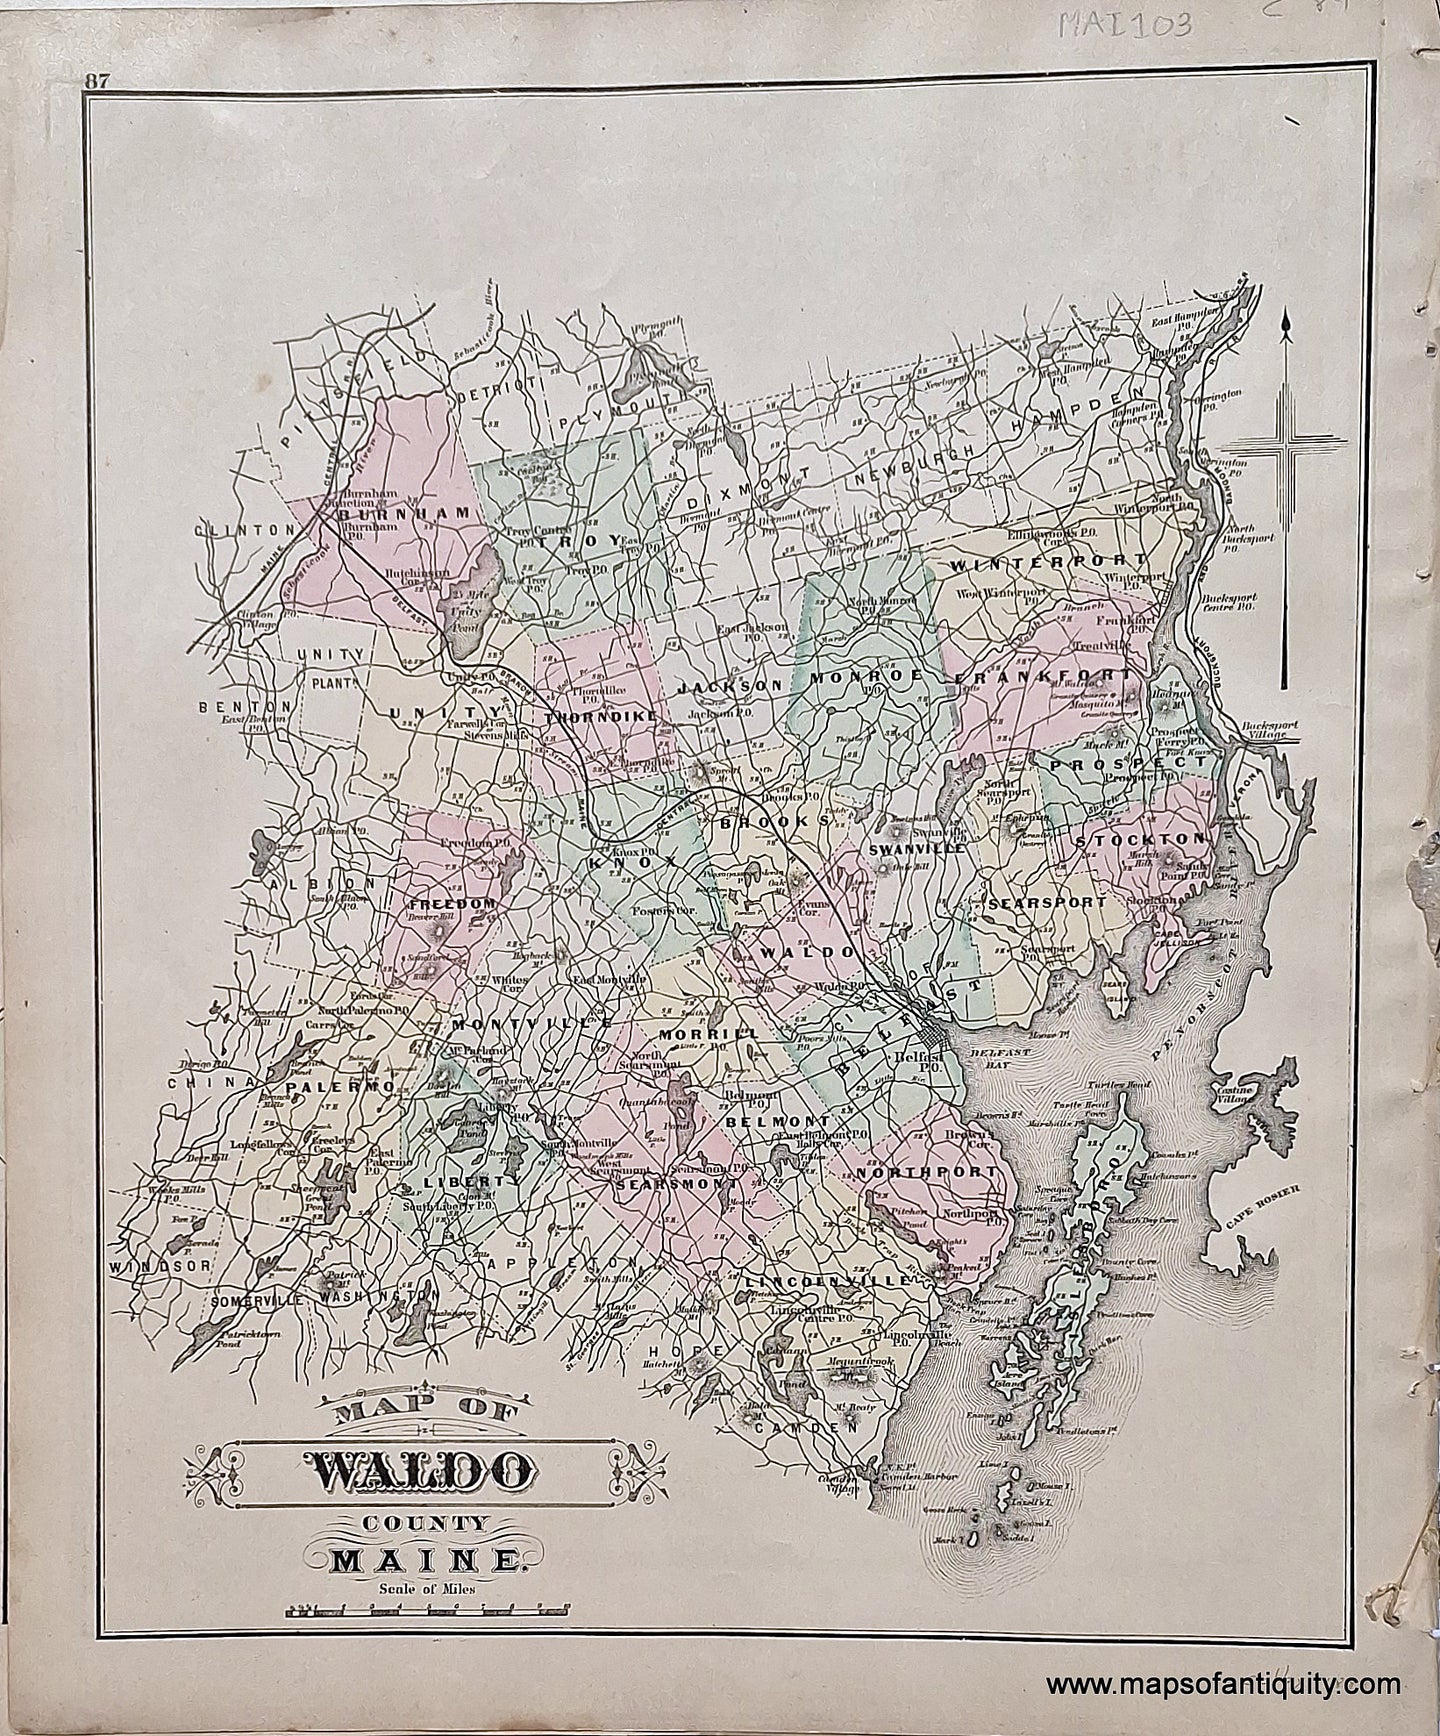 Hand-colored-Antique-Map-Waldo-County-Maine-United-States-Maine-c.-1884-Stuart/Colby-Maps-Of-Antiquity